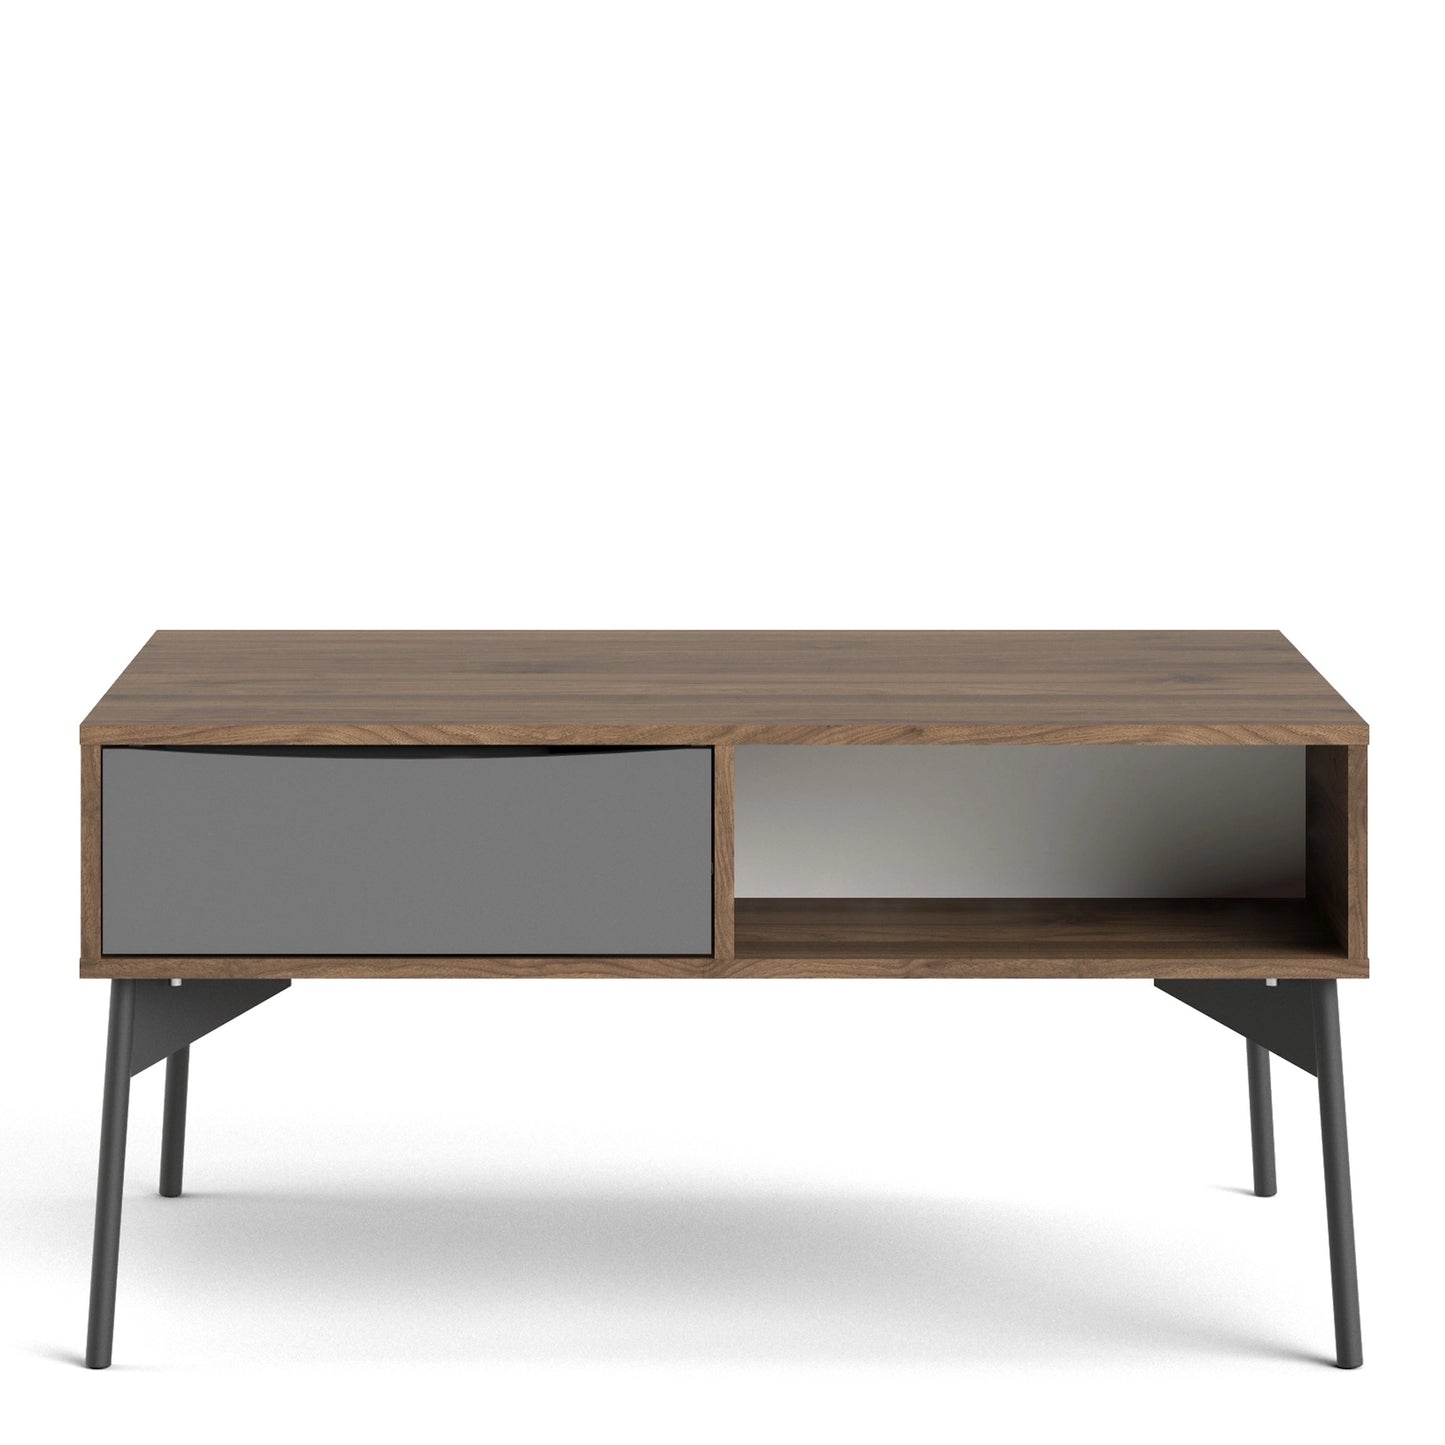 Furniture To Go Fur Coffee Table with 1 Drawer in Grey, White & Walnut